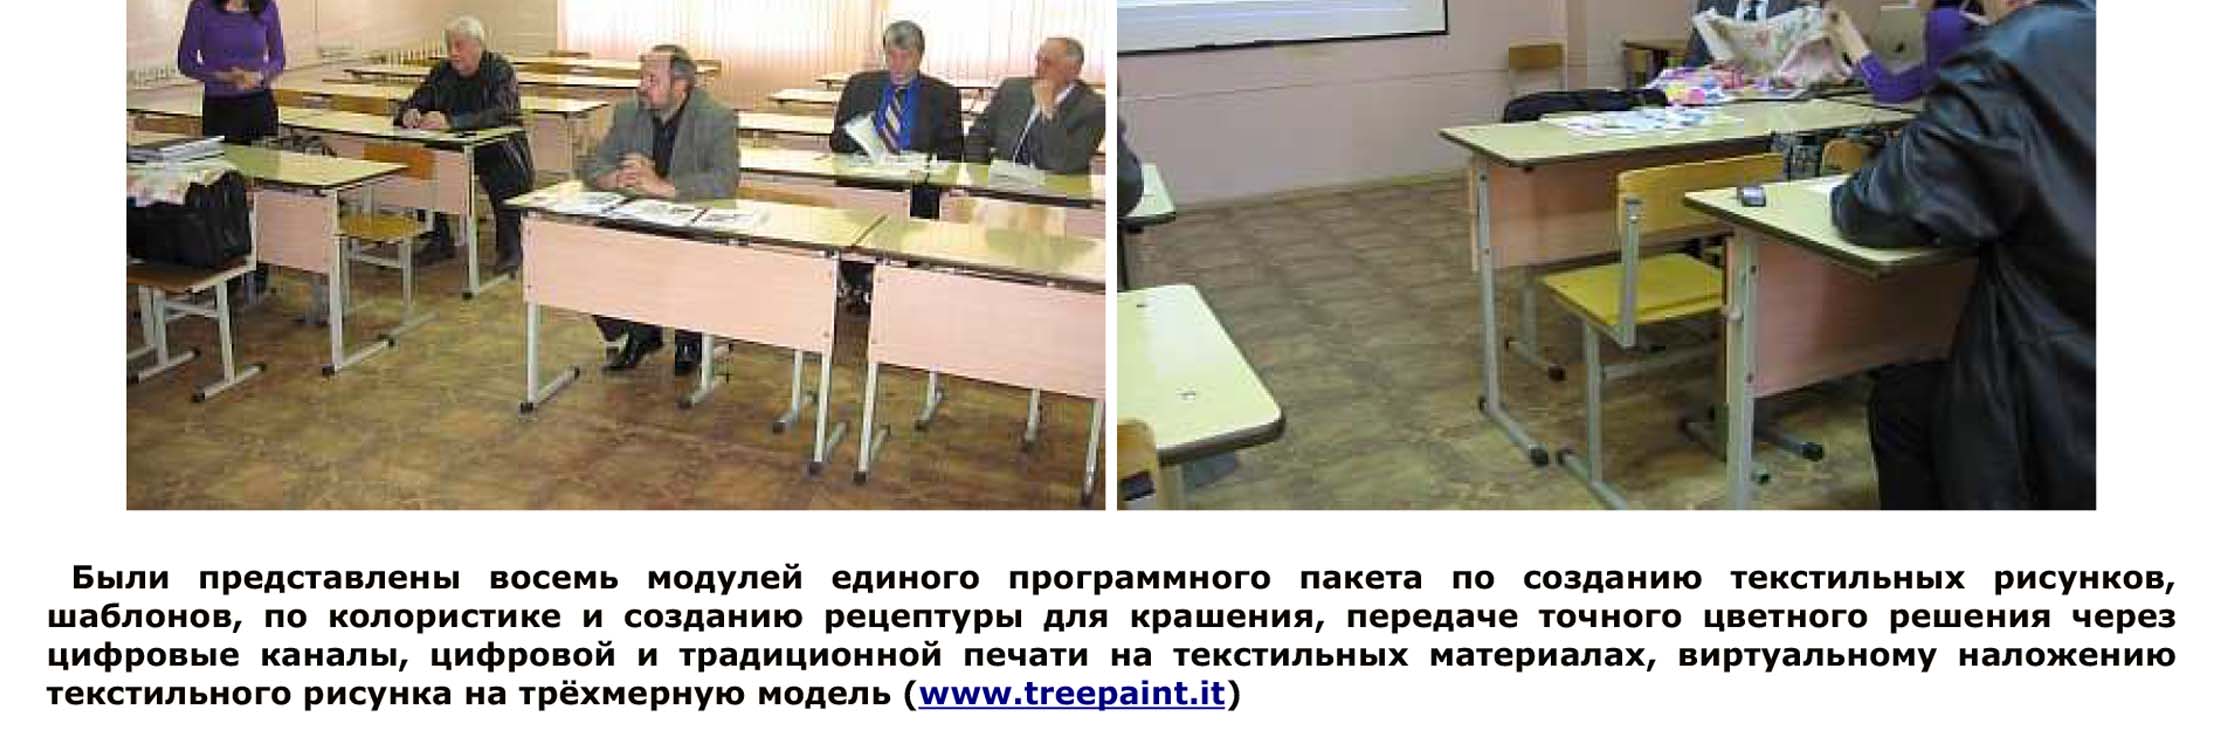 Meeting in Russia